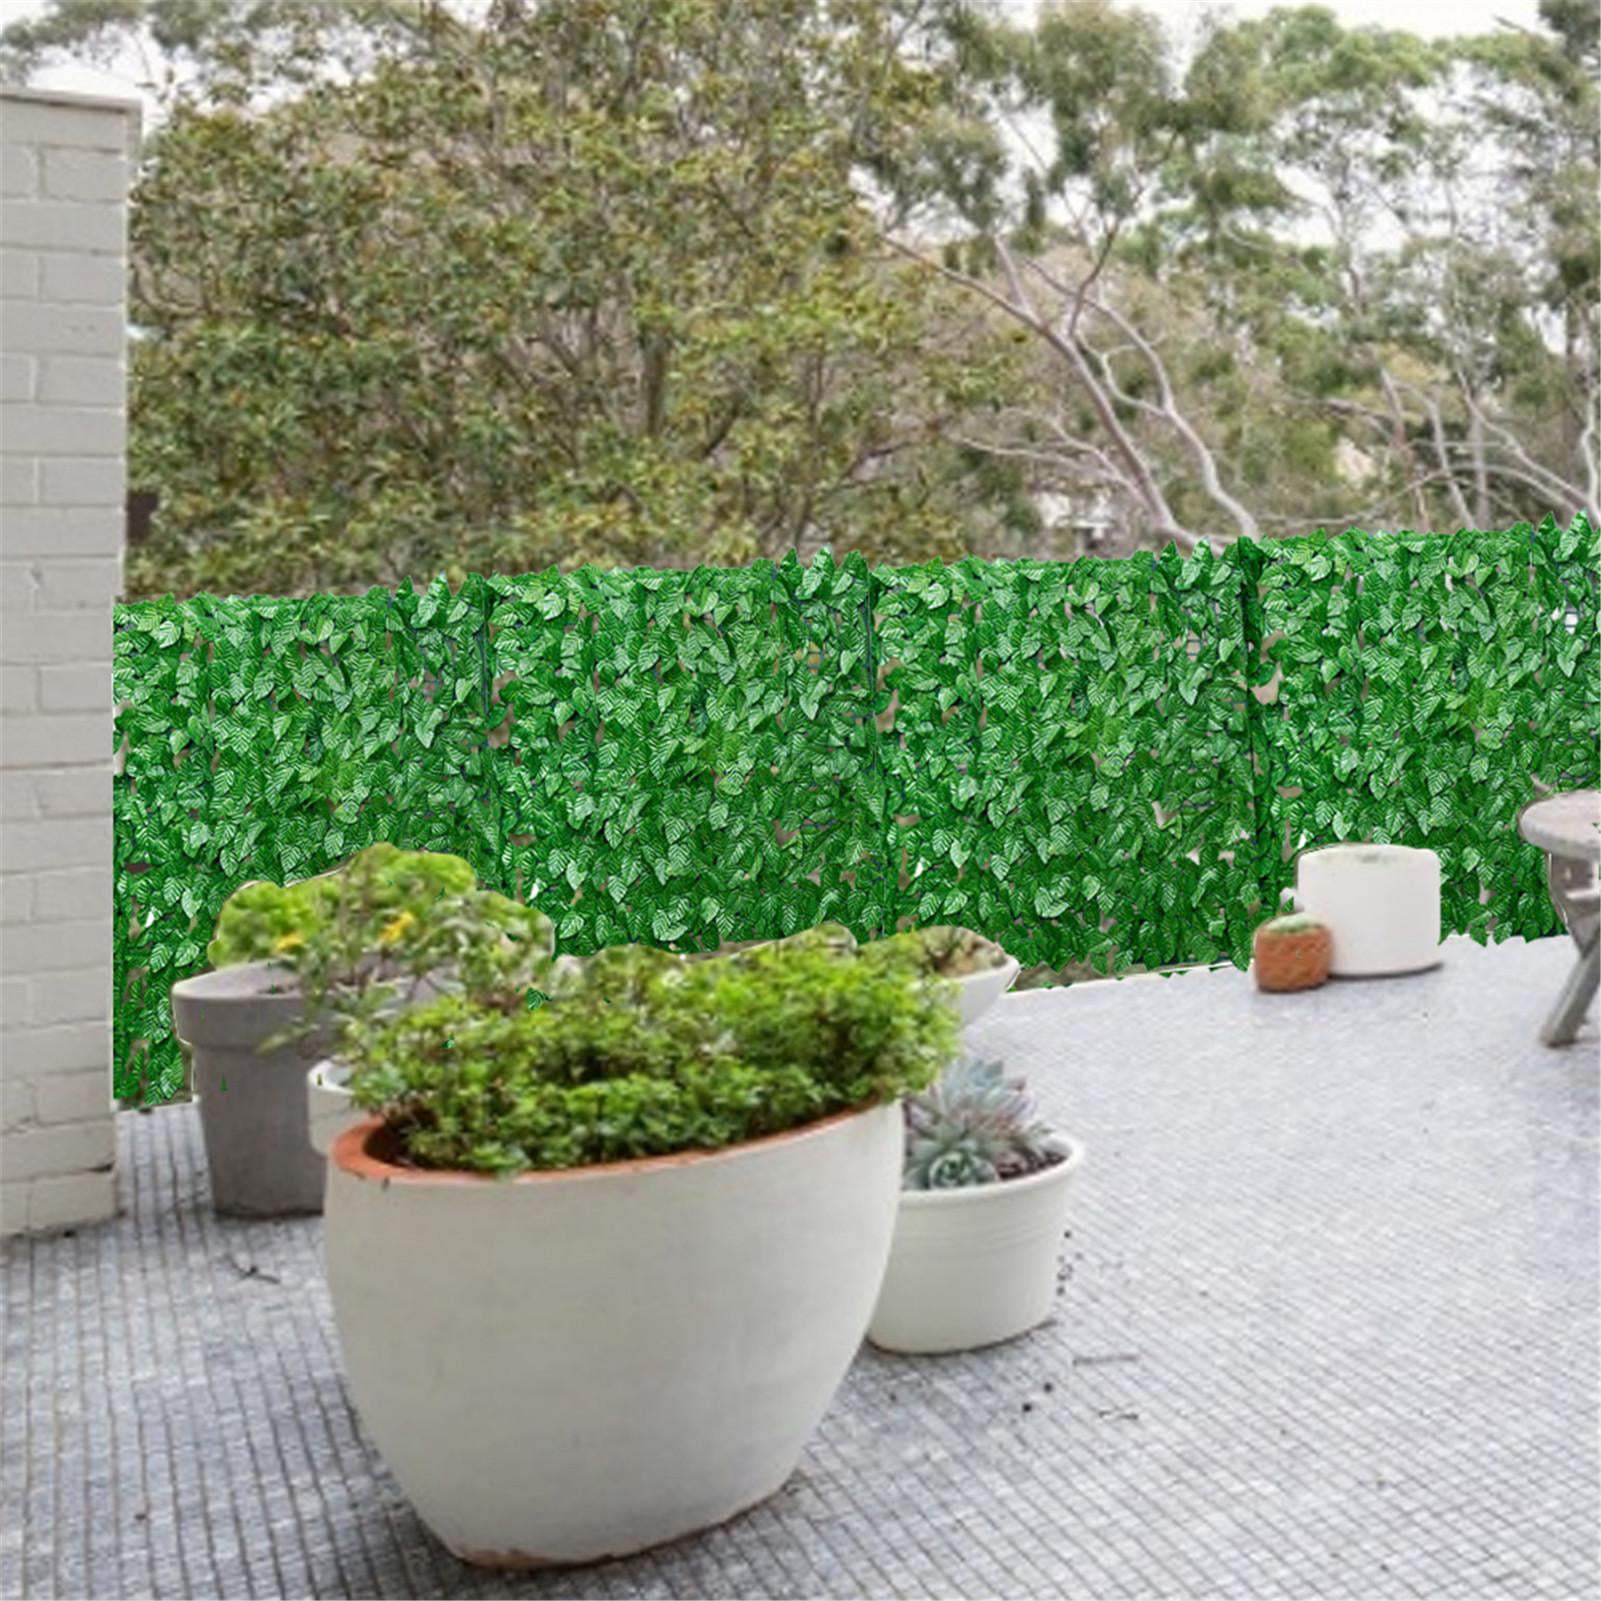 UV Fade Protected Privacy Hedging Wall Landscaping Garden Fence Balcony Screen Artificial Leaf Screening Roll